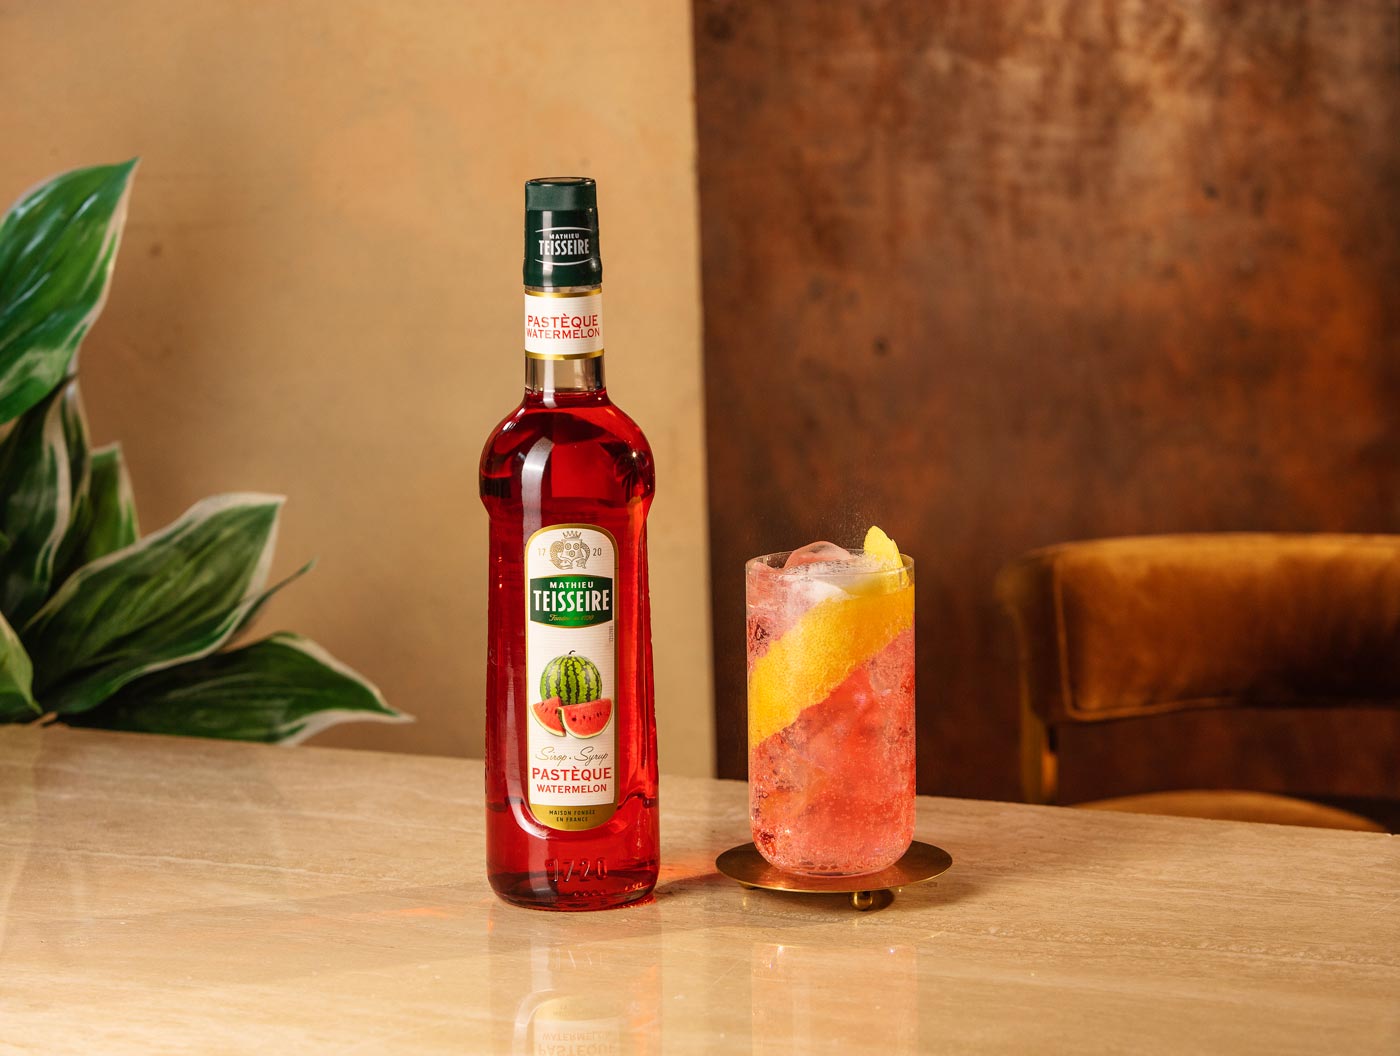 On a wooden table there is a bottle of watermelon Mathieu Teisseire syrup, and a tall glass containing ice, a pink drink and a slice of lemon. In the background there is a large plant and a leather bar chair.